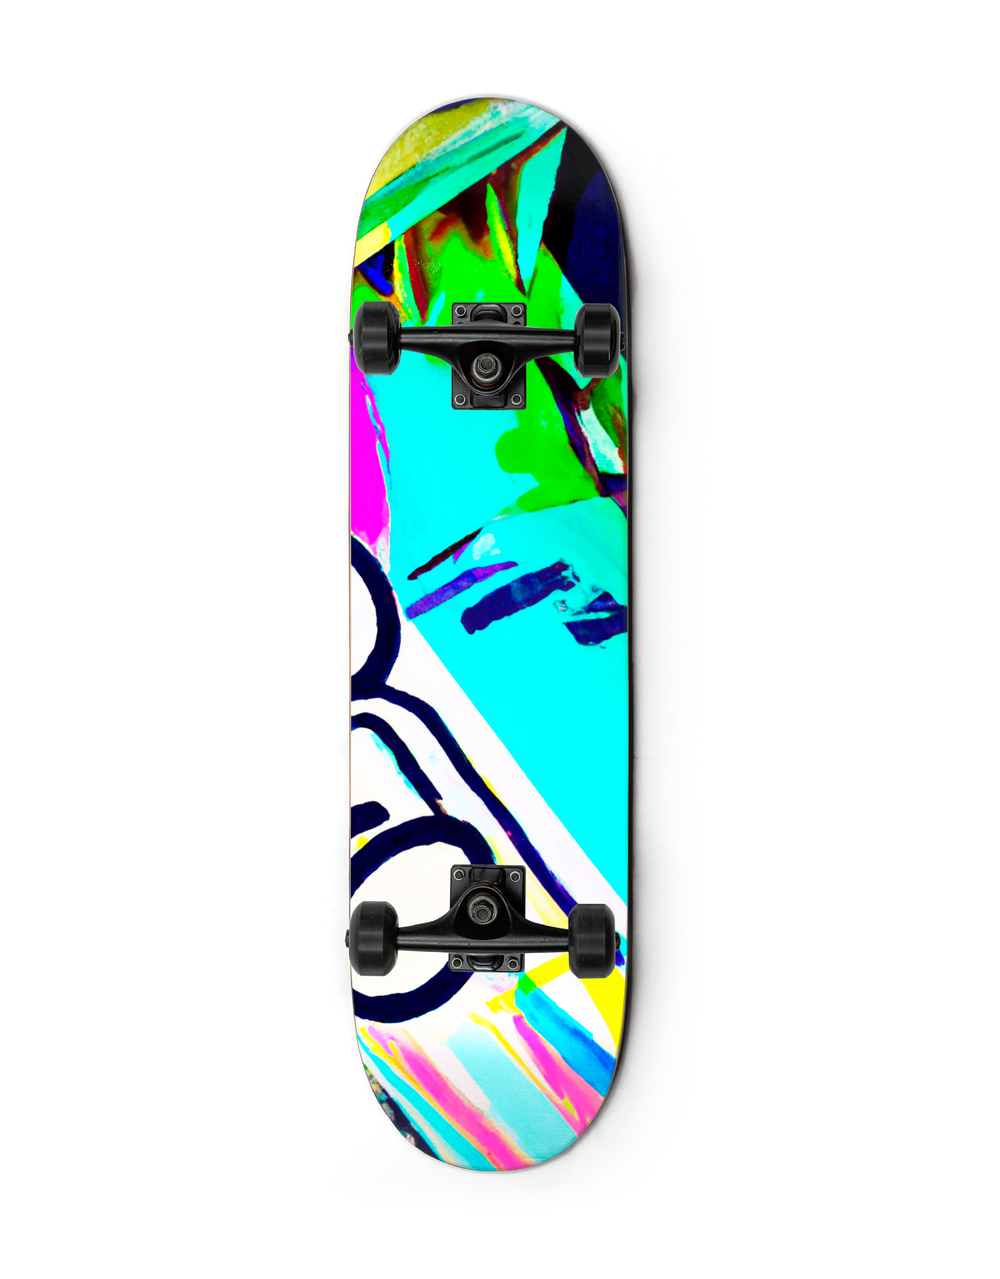 A collector skateboard painted with vibrant color patches and brush strokes